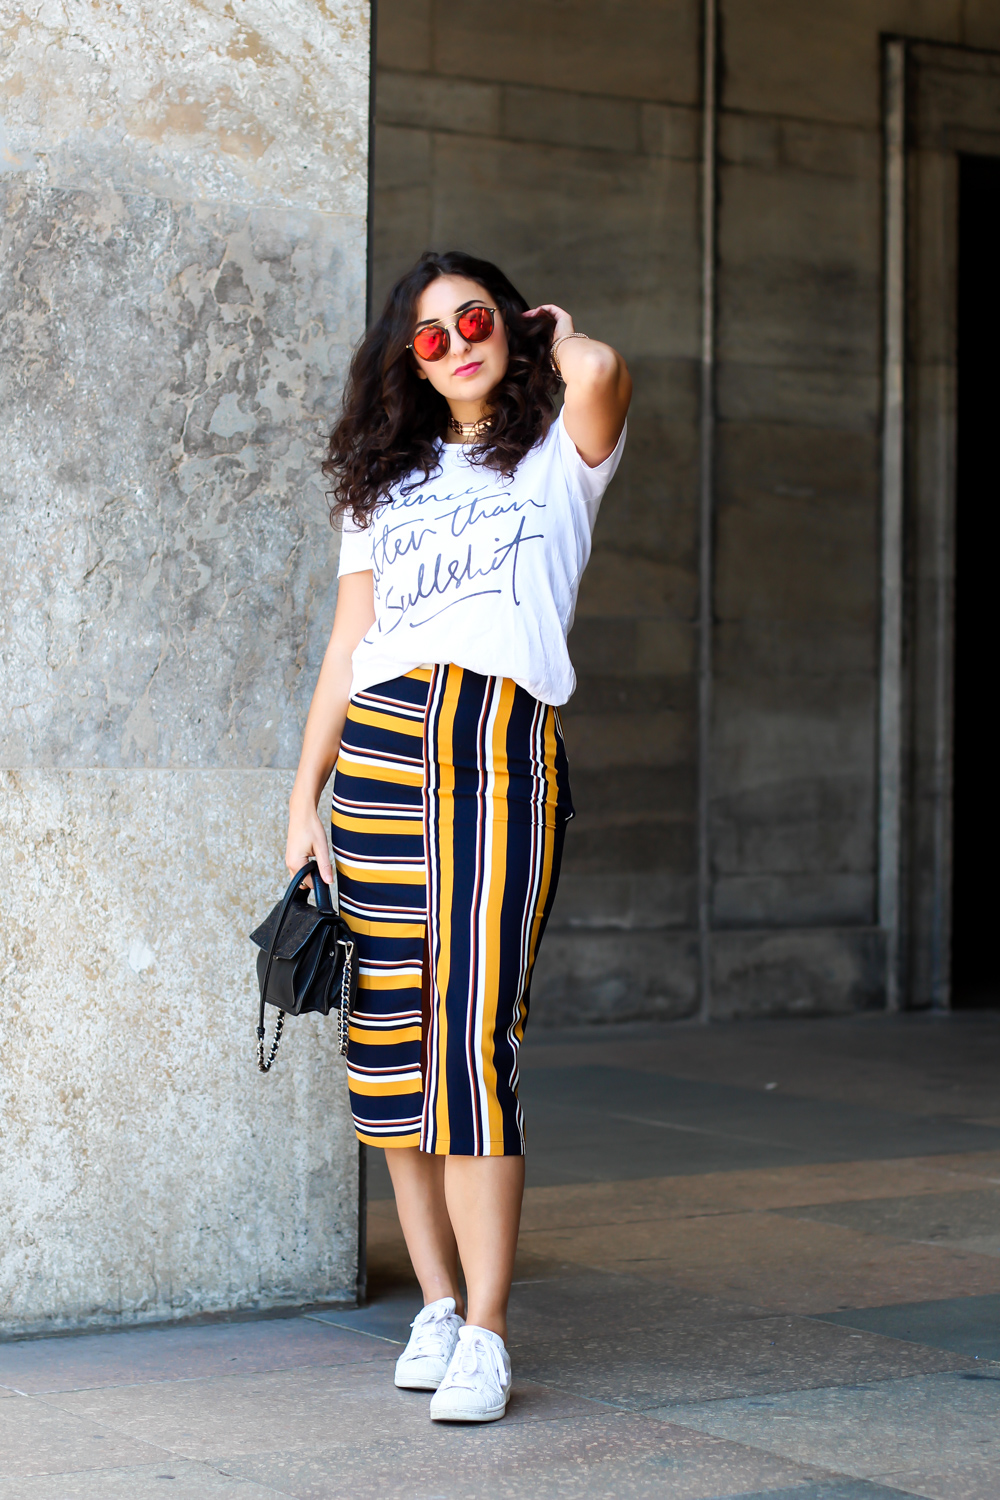 New Look striped midi skirt Rad motto shirt adidas superstars women outfit casual sporty summer look berlinstyle fashion blogger germany berlin samieze